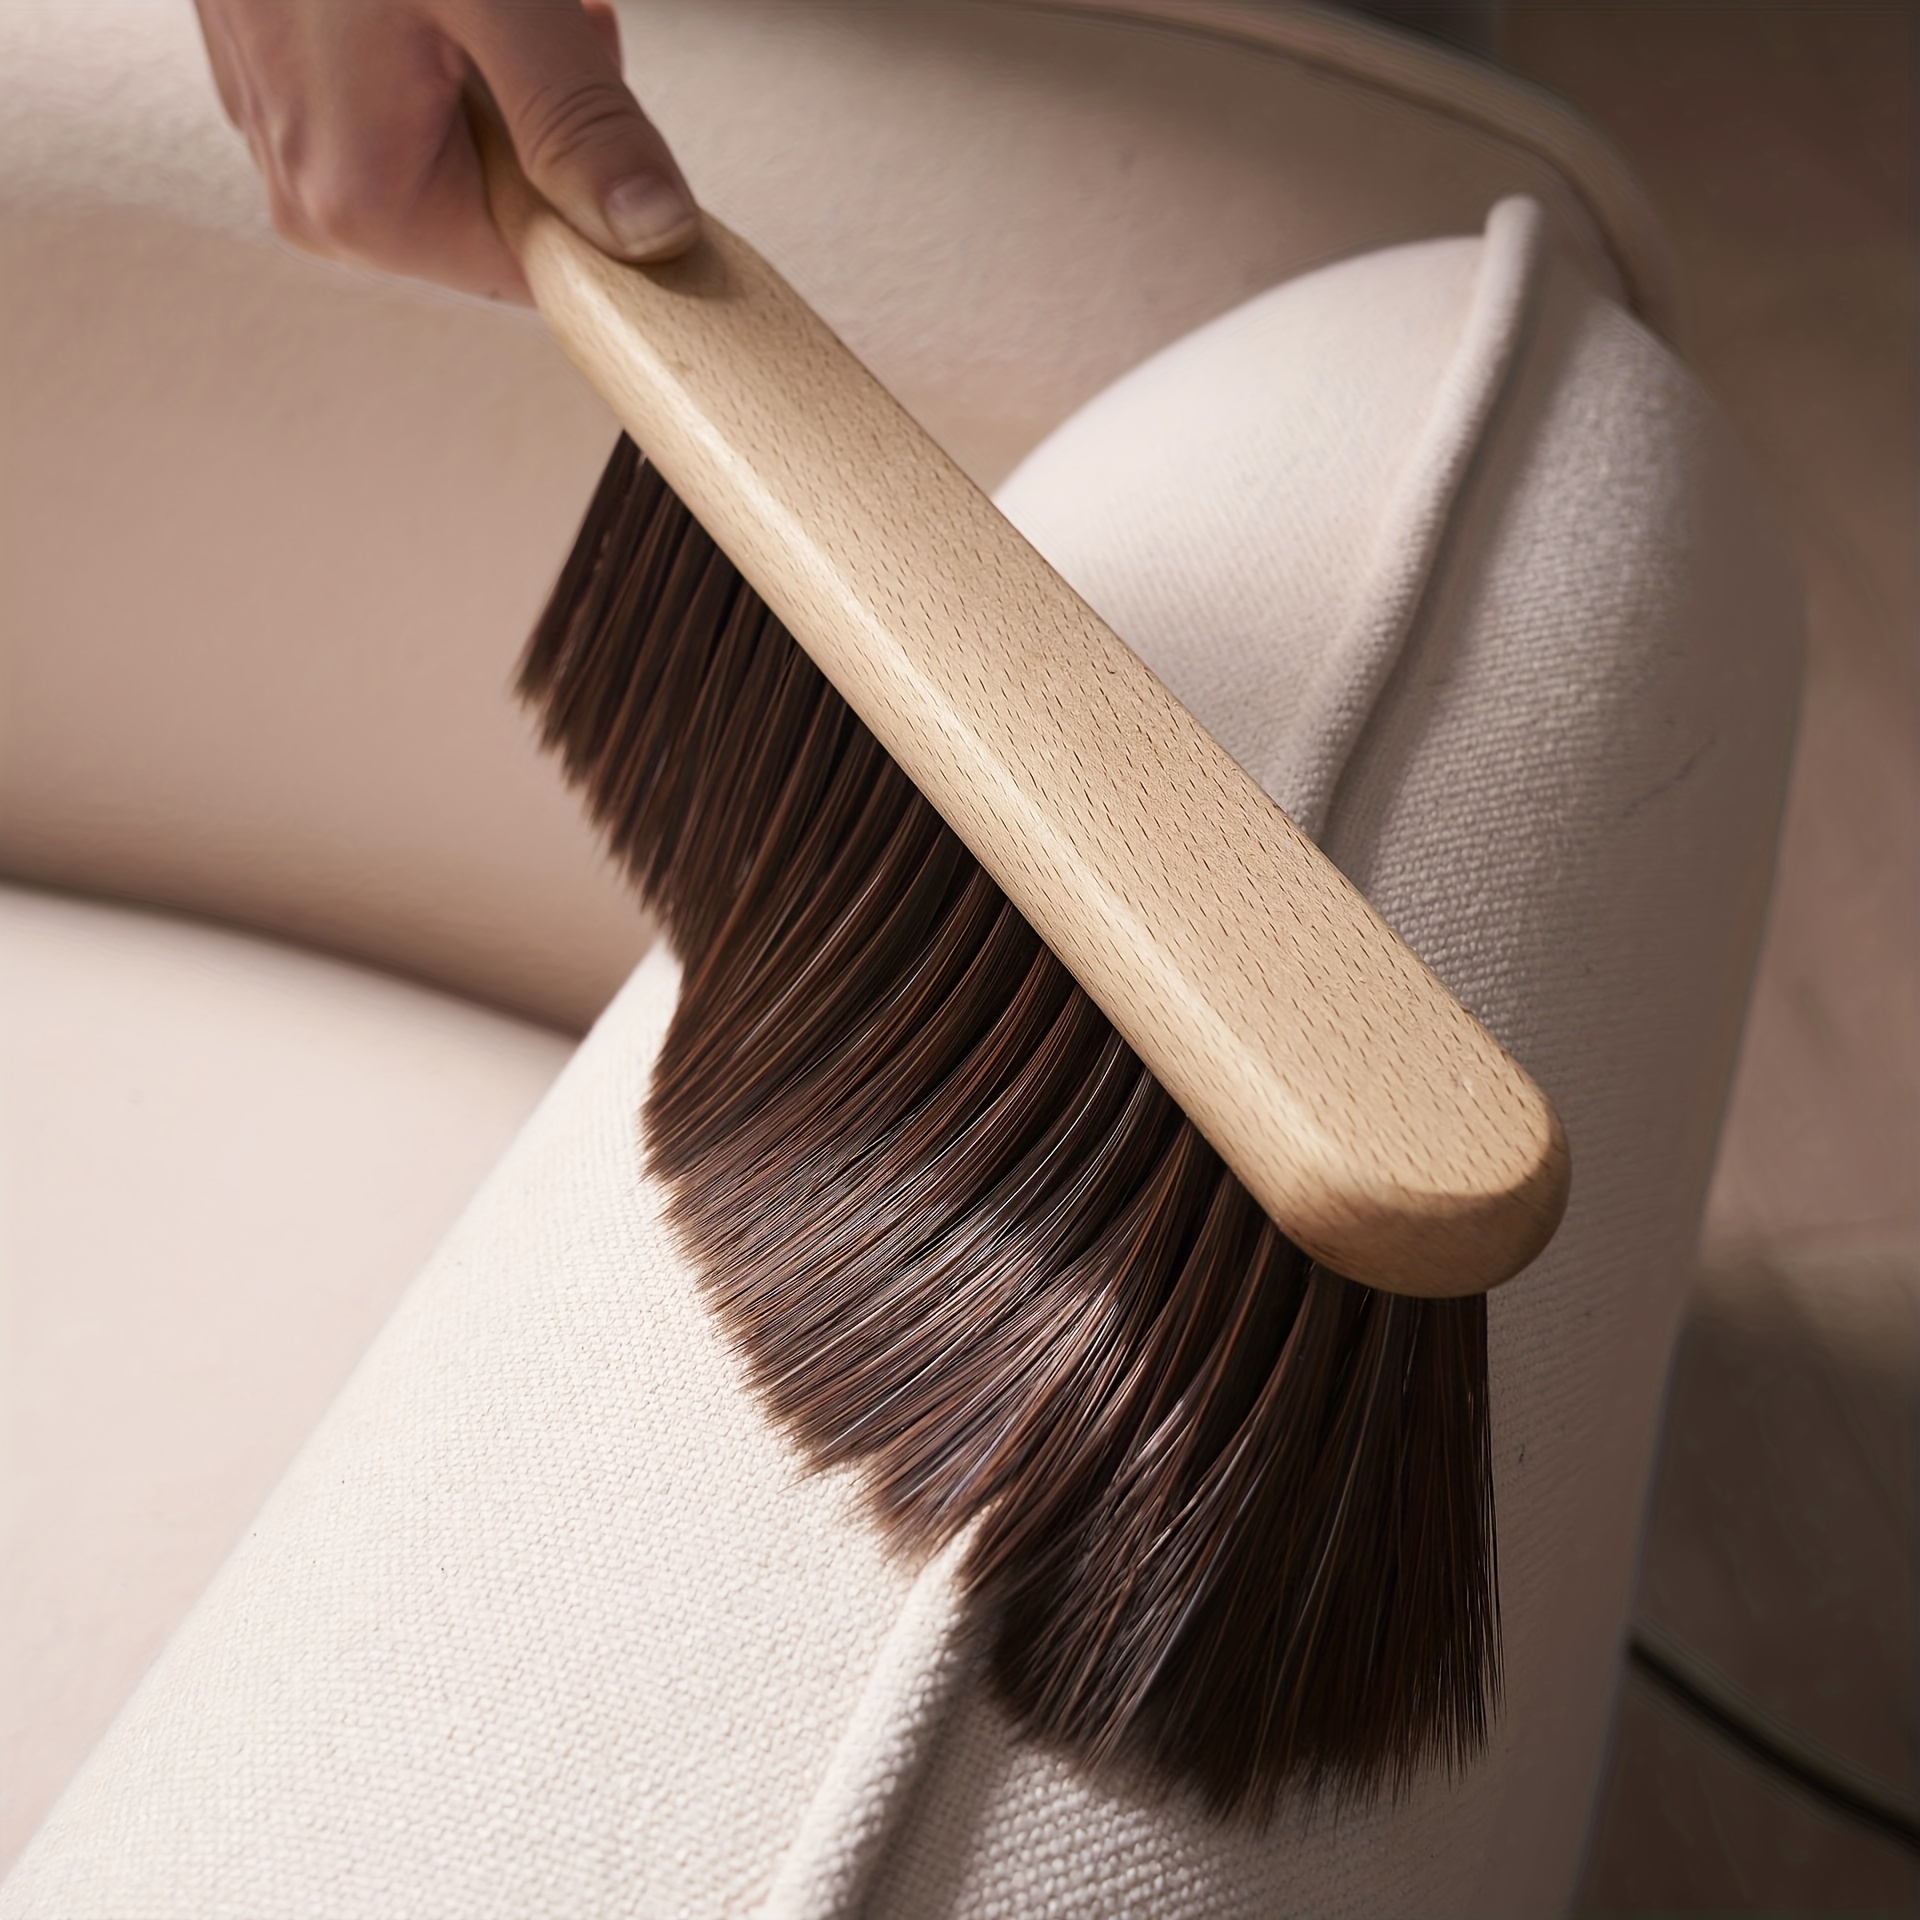 Hand Broom Cleaning Brushes-Soft Bristles Dusting Brush for Cleaning  Car/Bed/Couch/Draft/Garden/Furniture/Clothes,Wooden Handle